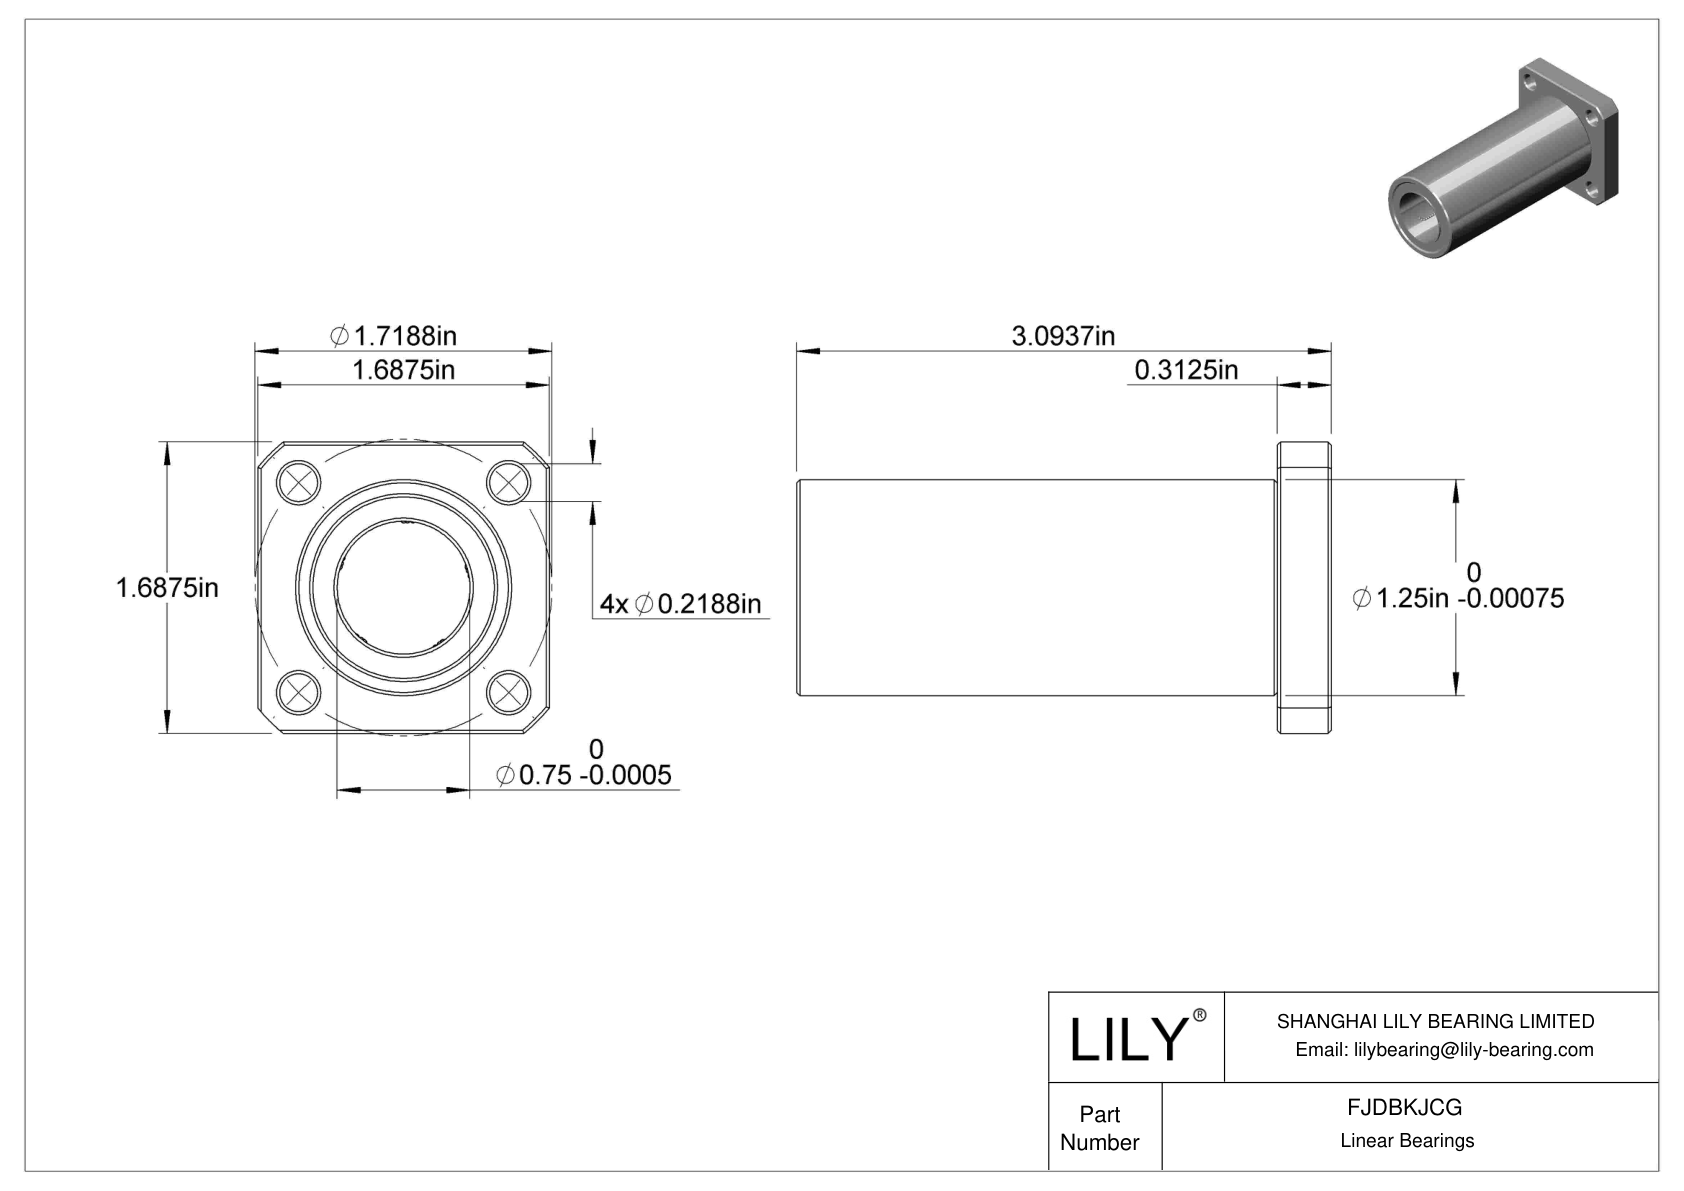 FJDBKJCG Corrosion-Resistant Flange-Mounted Linear Ball Bearings cad drawing